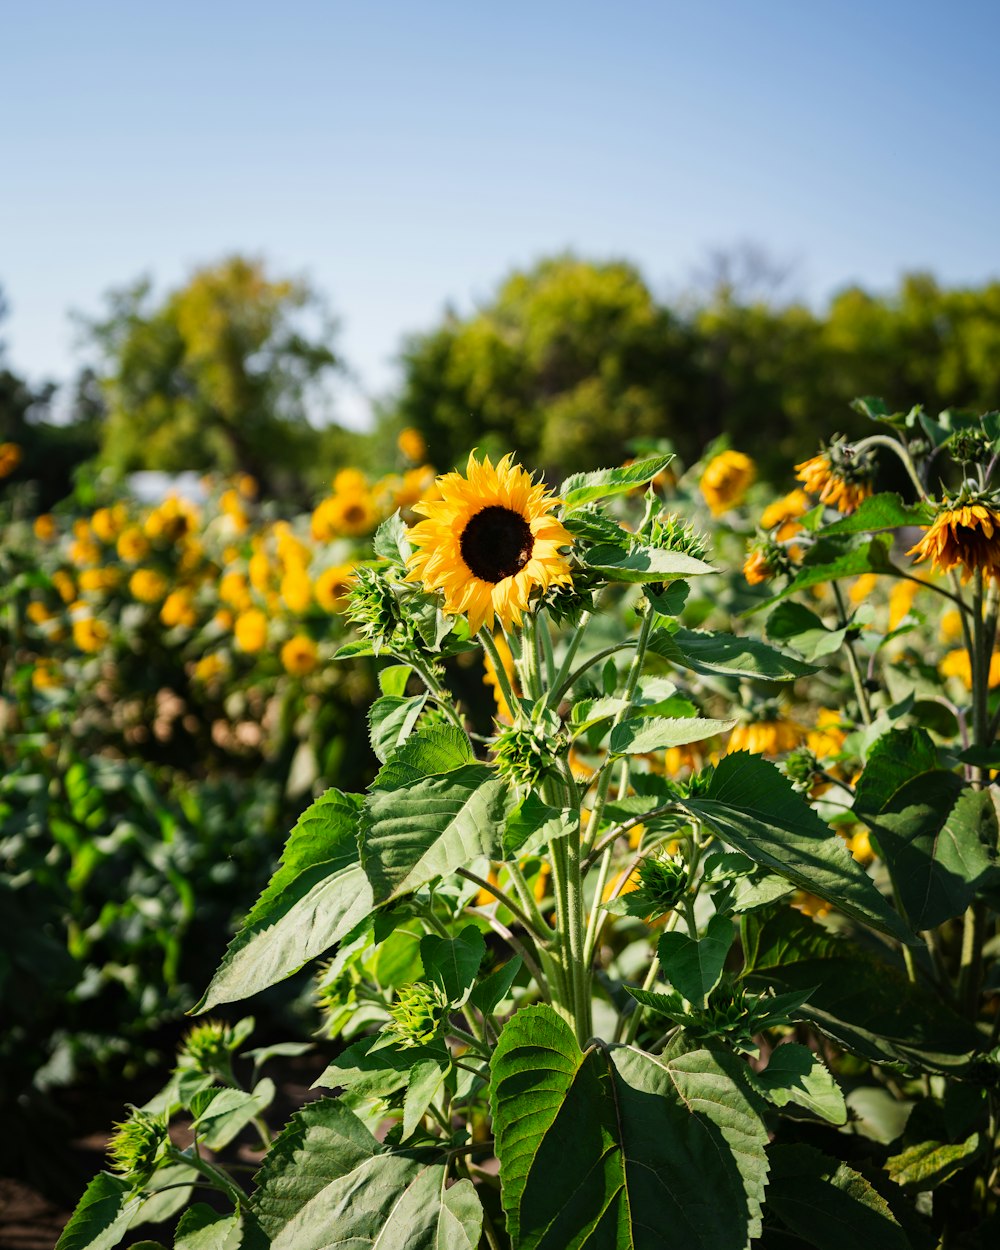 a field of sunflowers with trees in the background